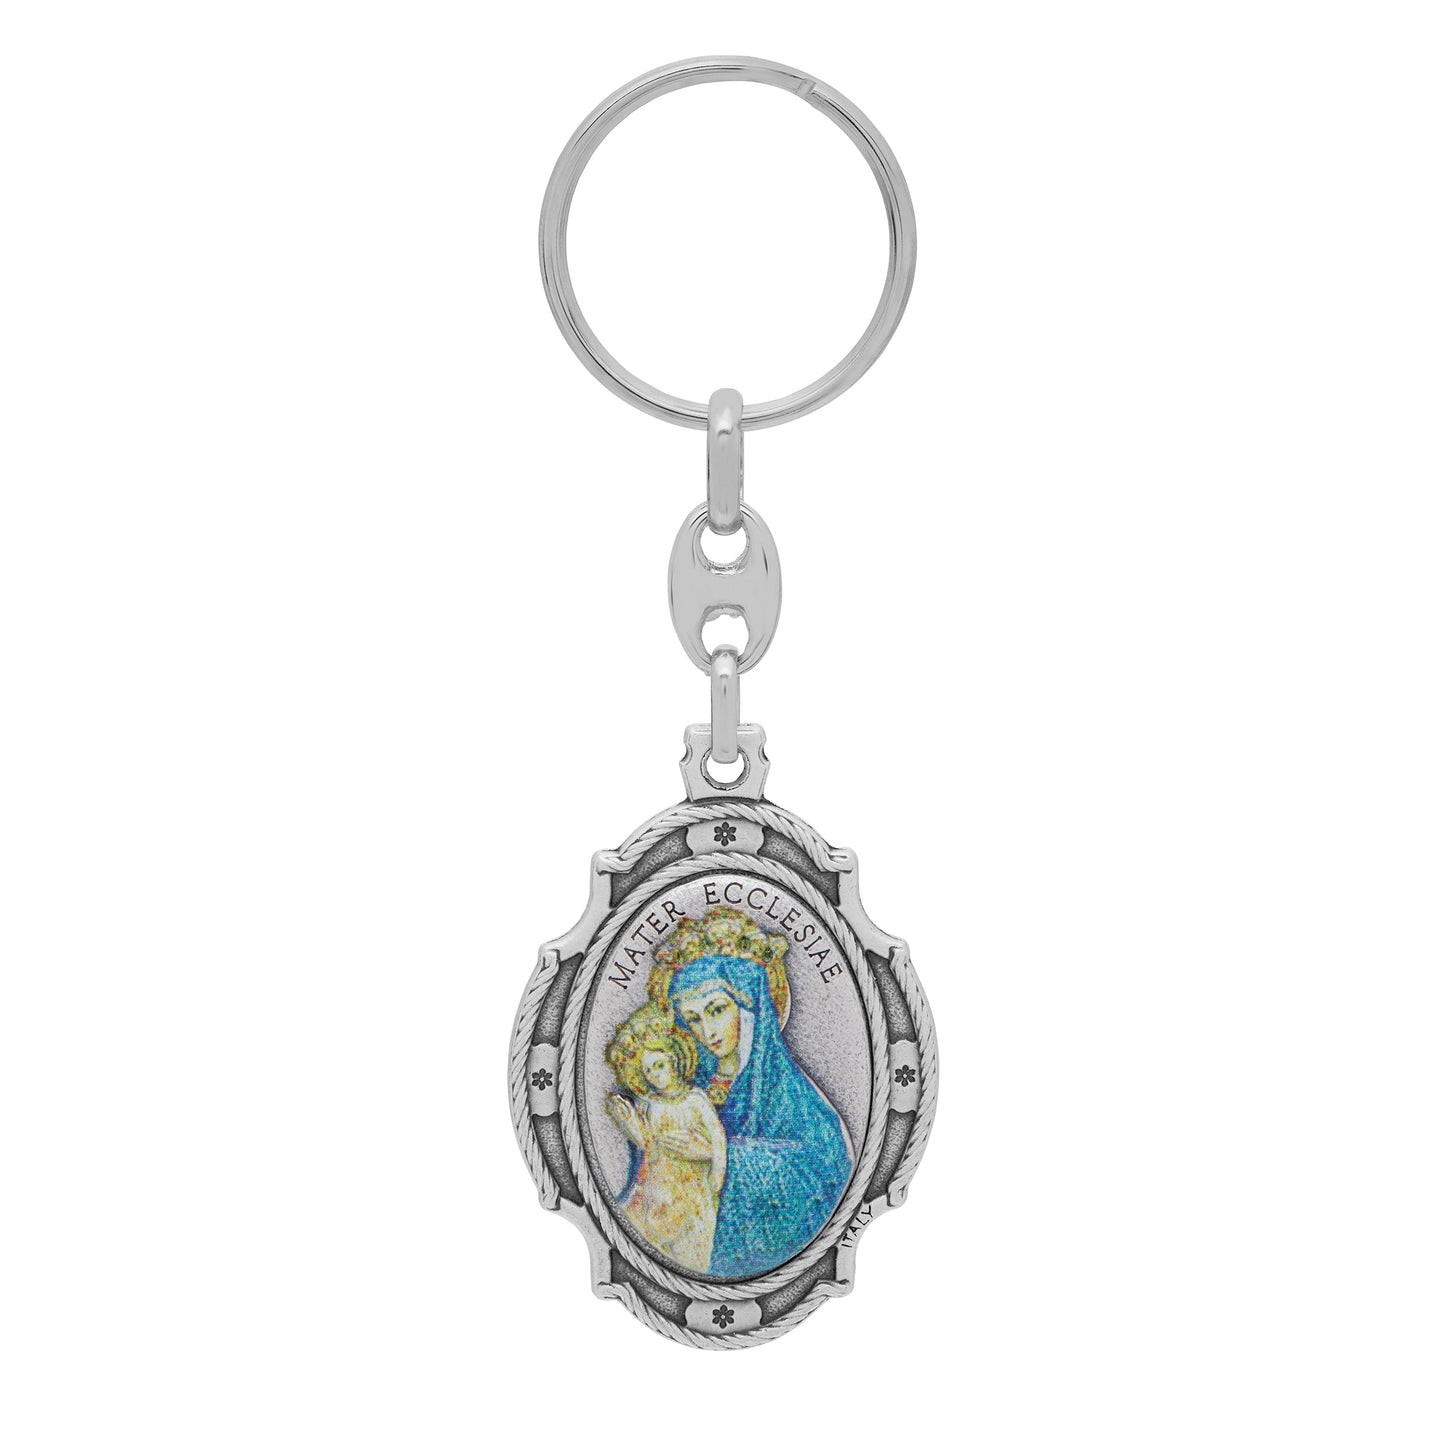 Mondo Cattolico Keychains Oval Colored Metal Keychain With Worked Frame of Mater Ecclesiae